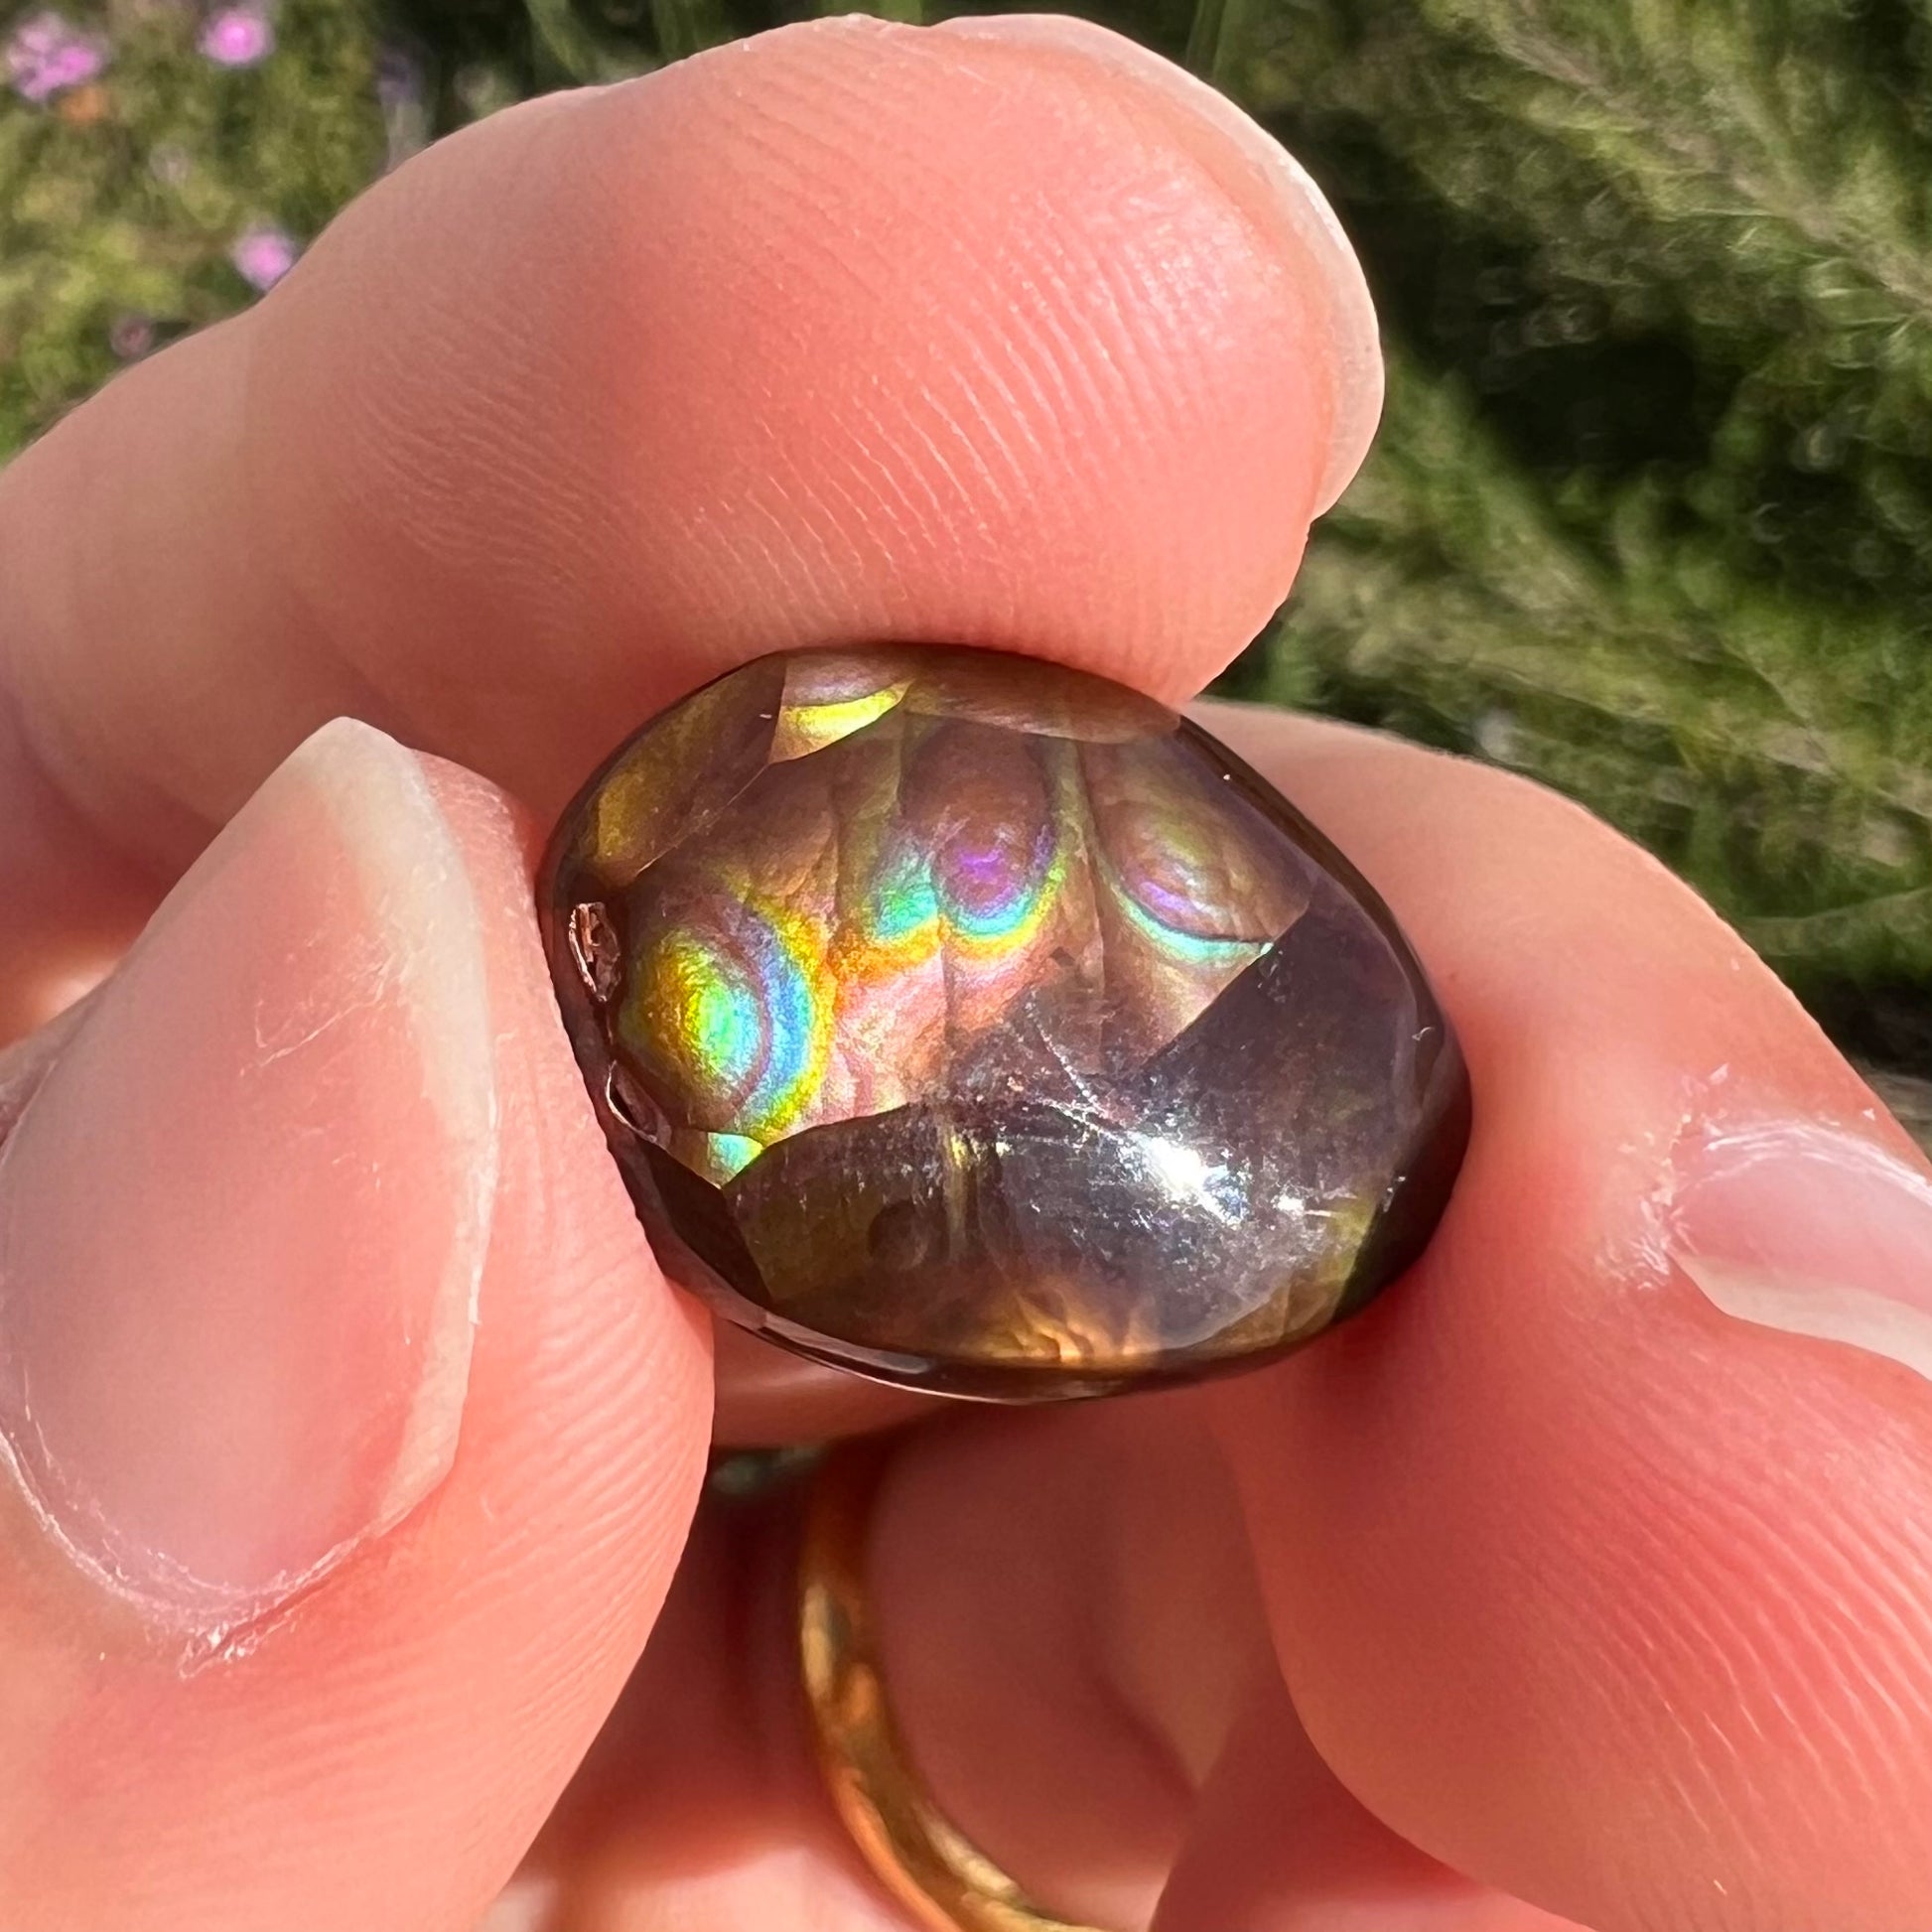 A loose, oval cabochon cut Mexican fire agate stone with pink, orange, and purple banding.